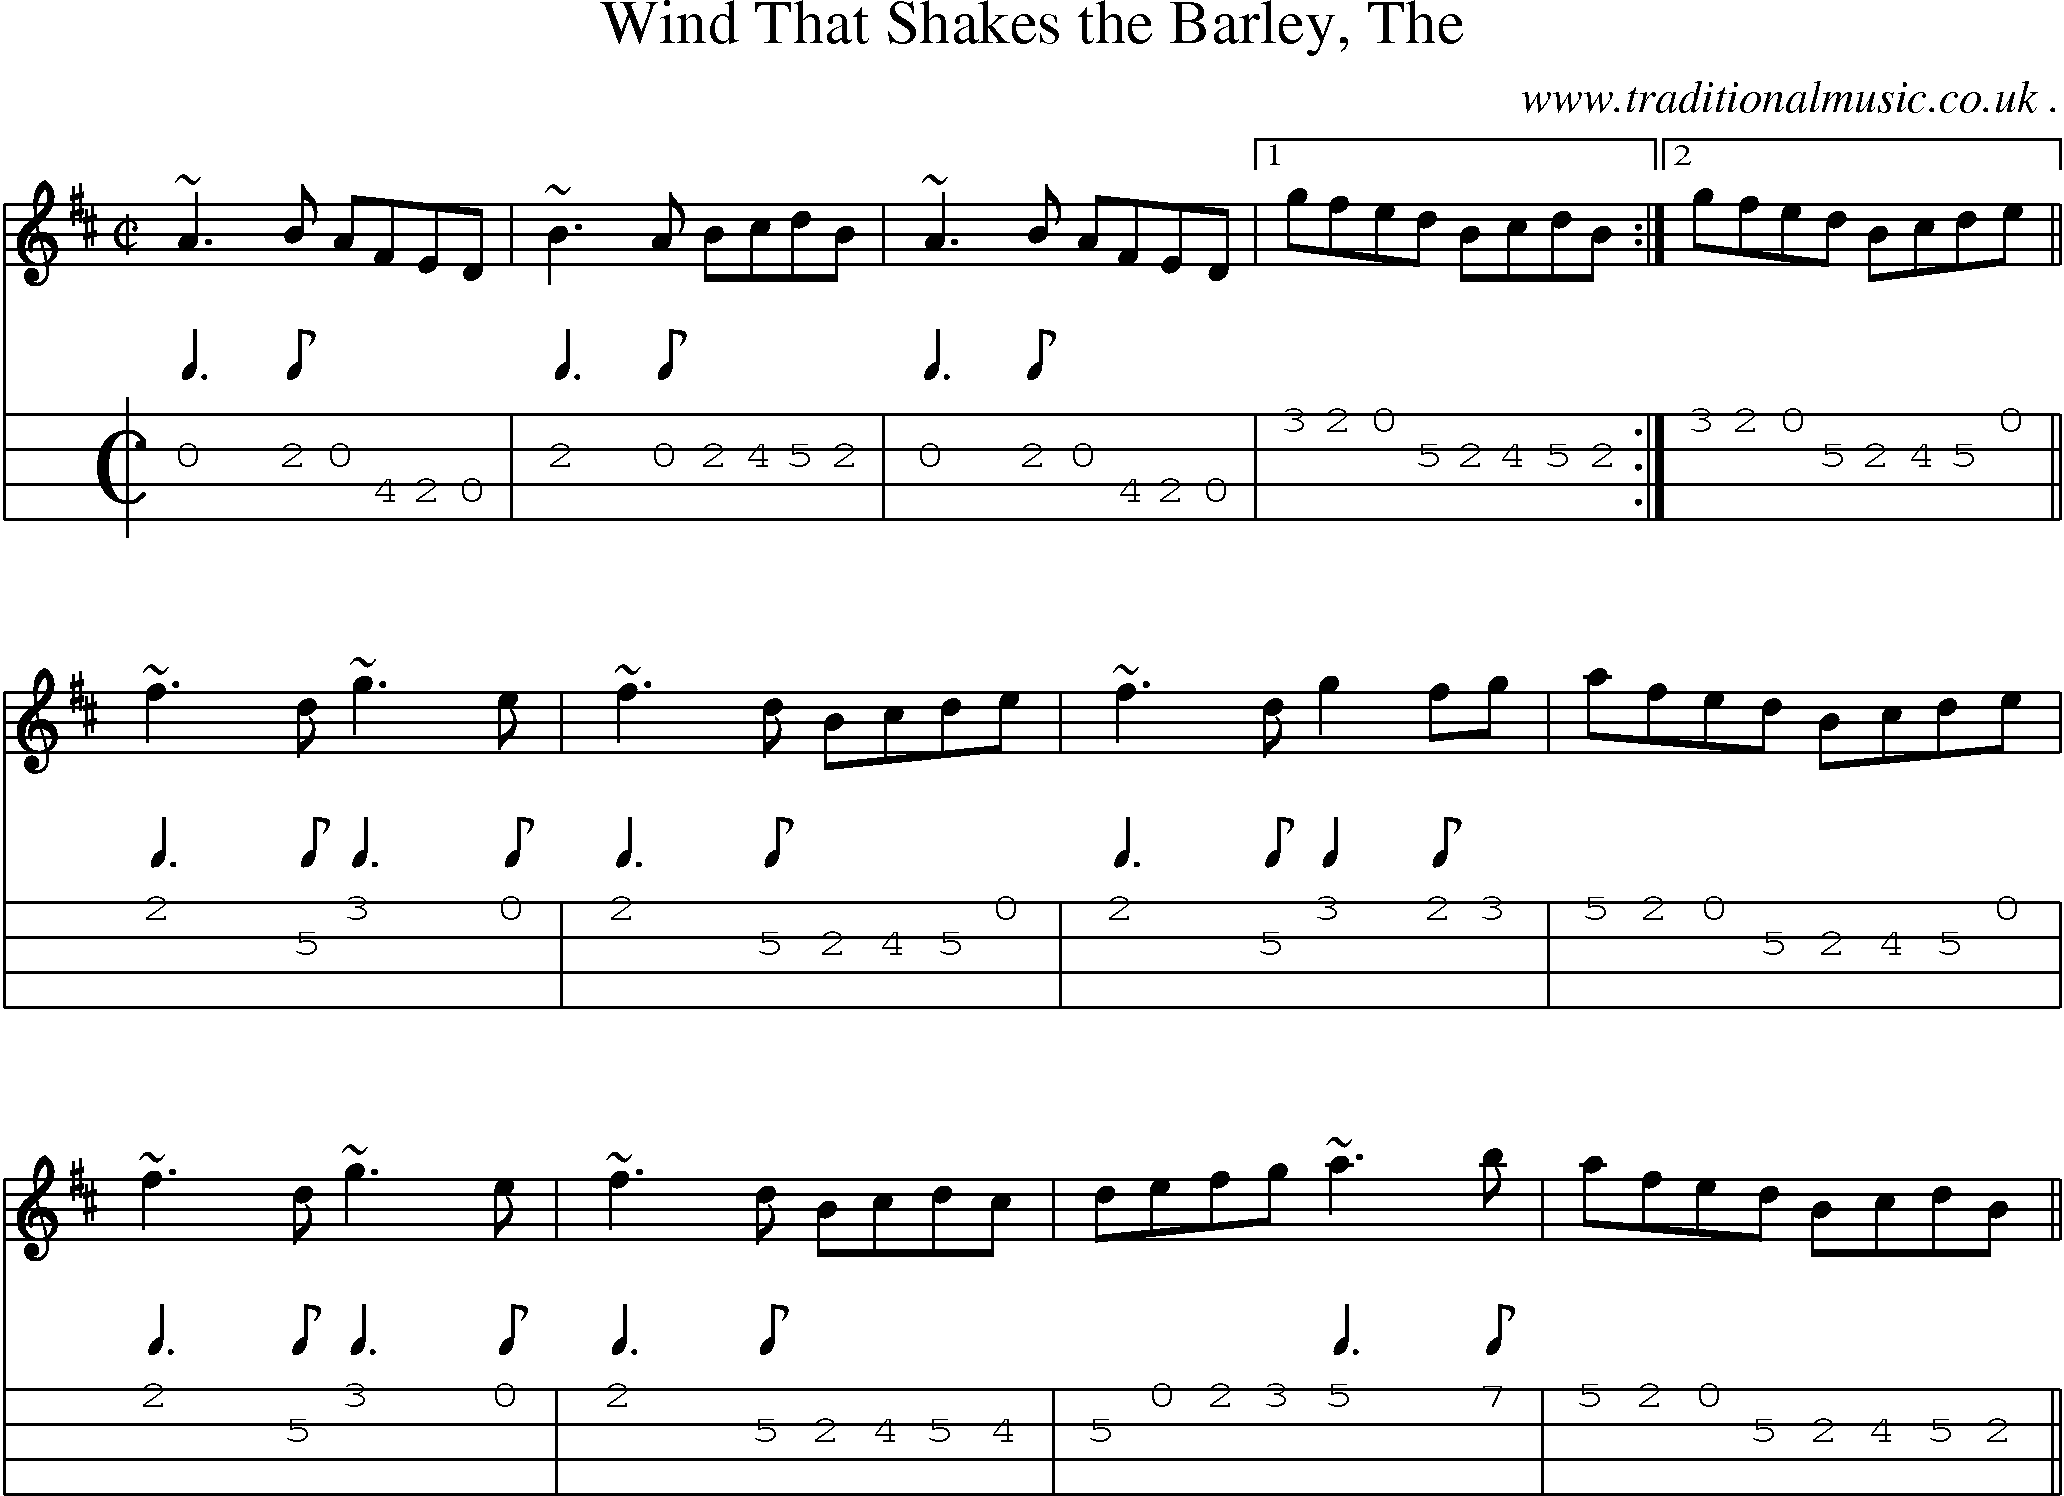 Sheet-music  score, Chords and Mandolin Tabs for Wind That Shakes The Barley The